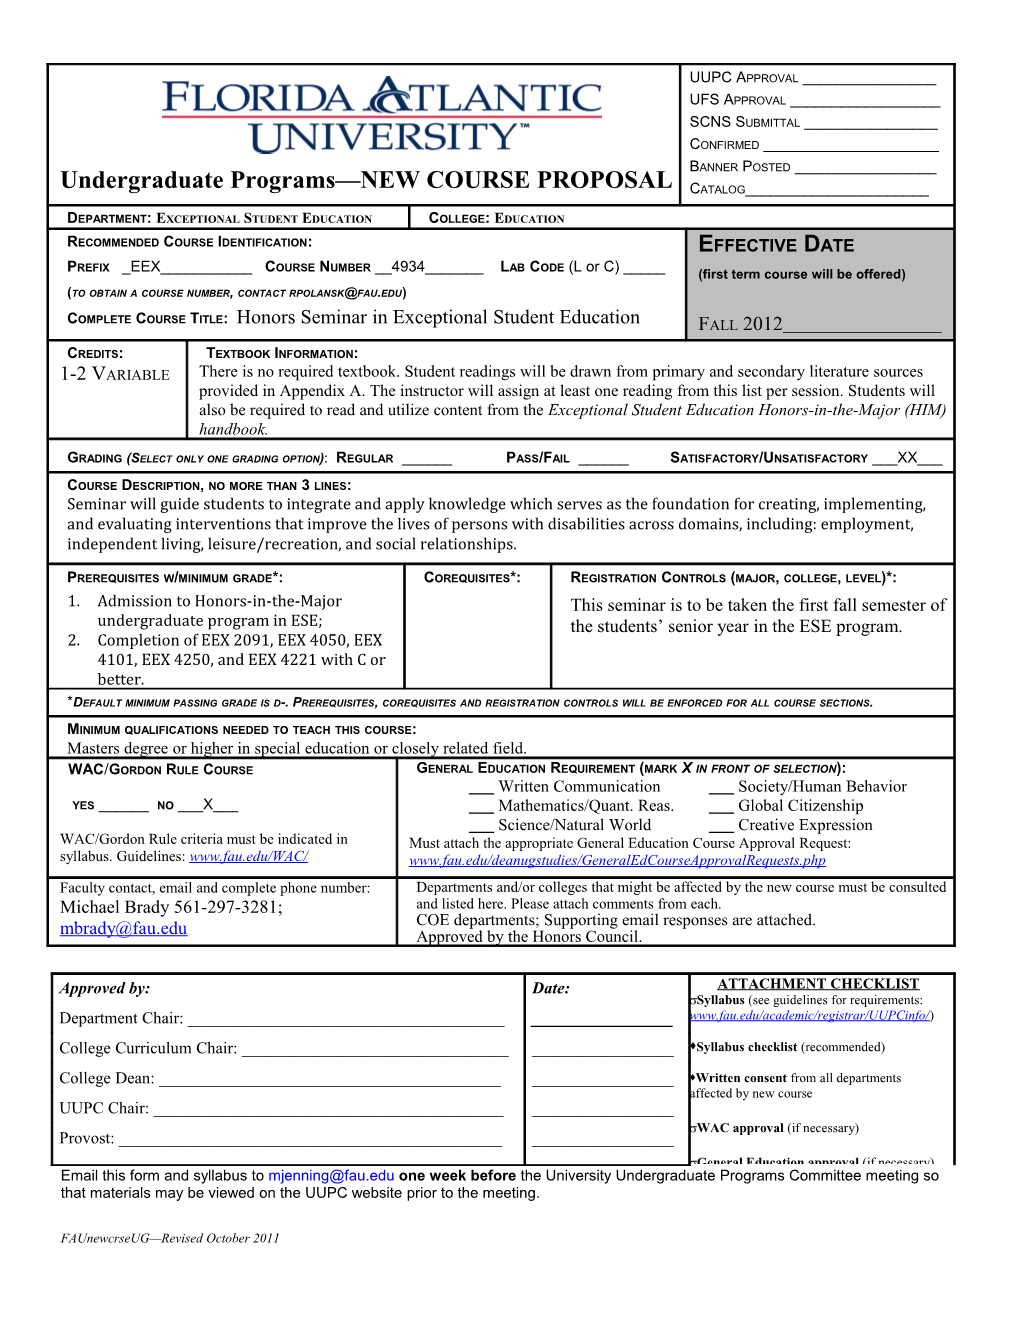 CD037, Course Termination Or Change Transmittal Form s6